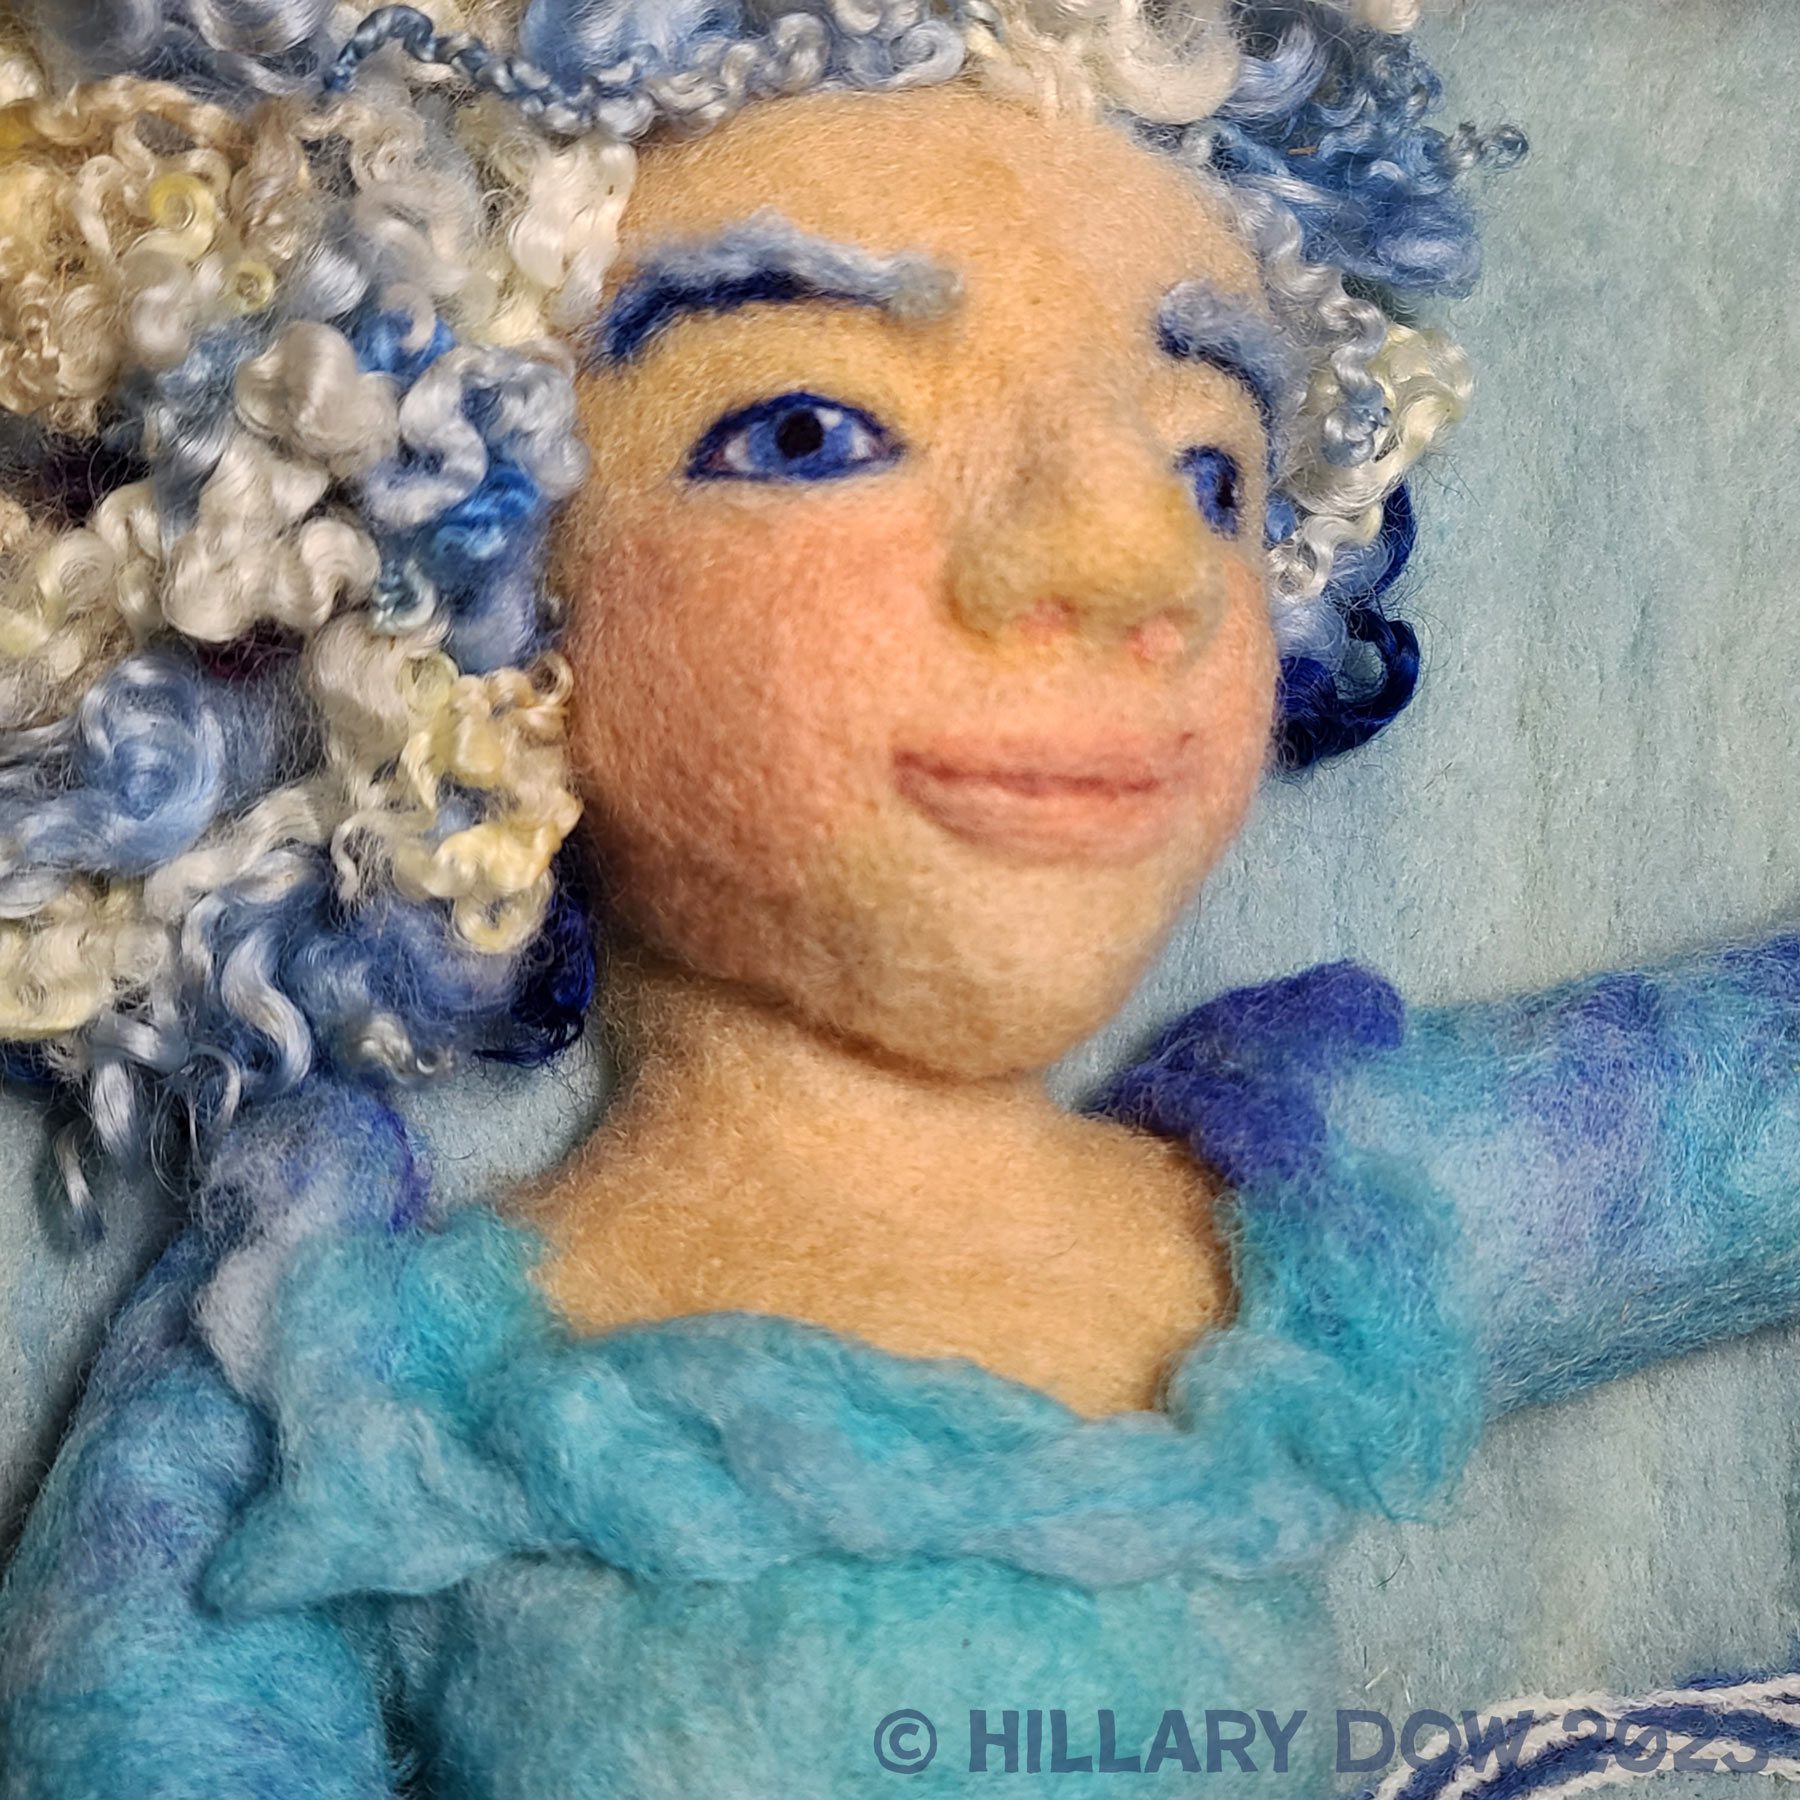 Detail of Mother Winter needle felted illustration by Hillary Dow